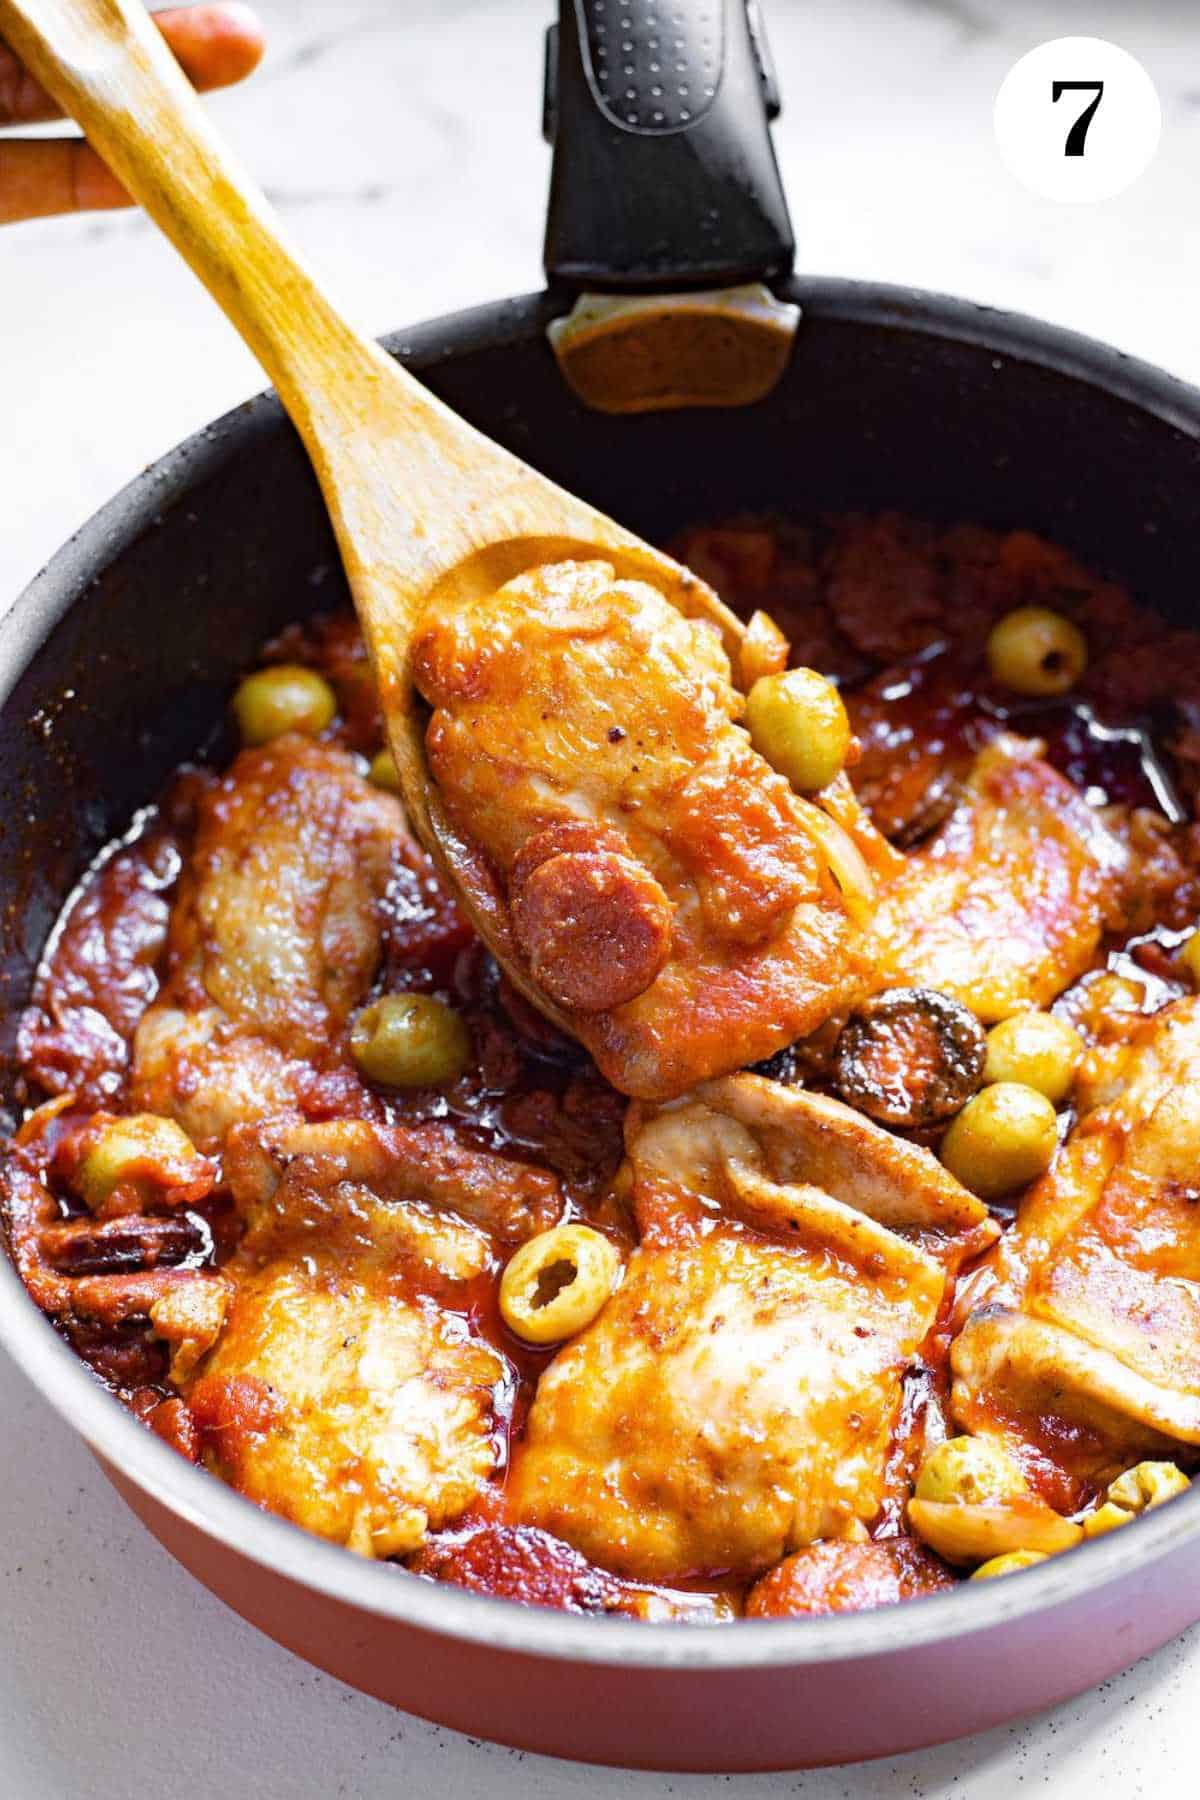 A person spooning Spanish stewed chicken with a wooden spoon.